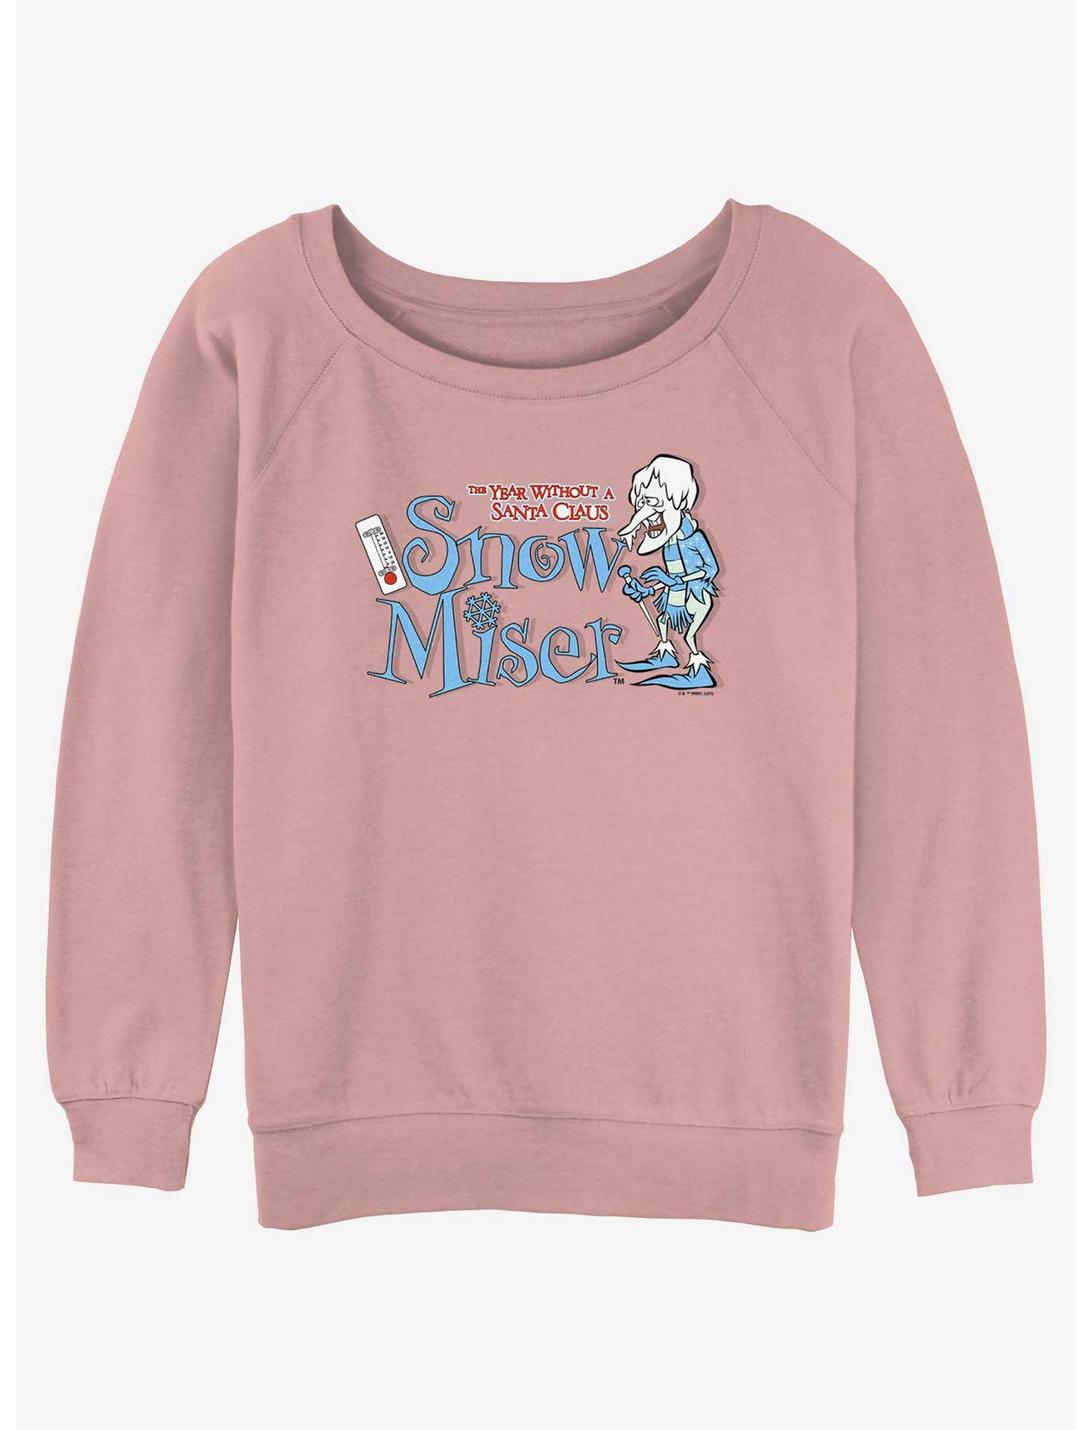 The Year Without a Santa Claus Snow Miser Badge Womens Slouchy Sweatshirt, DESERTPNK, hi-res